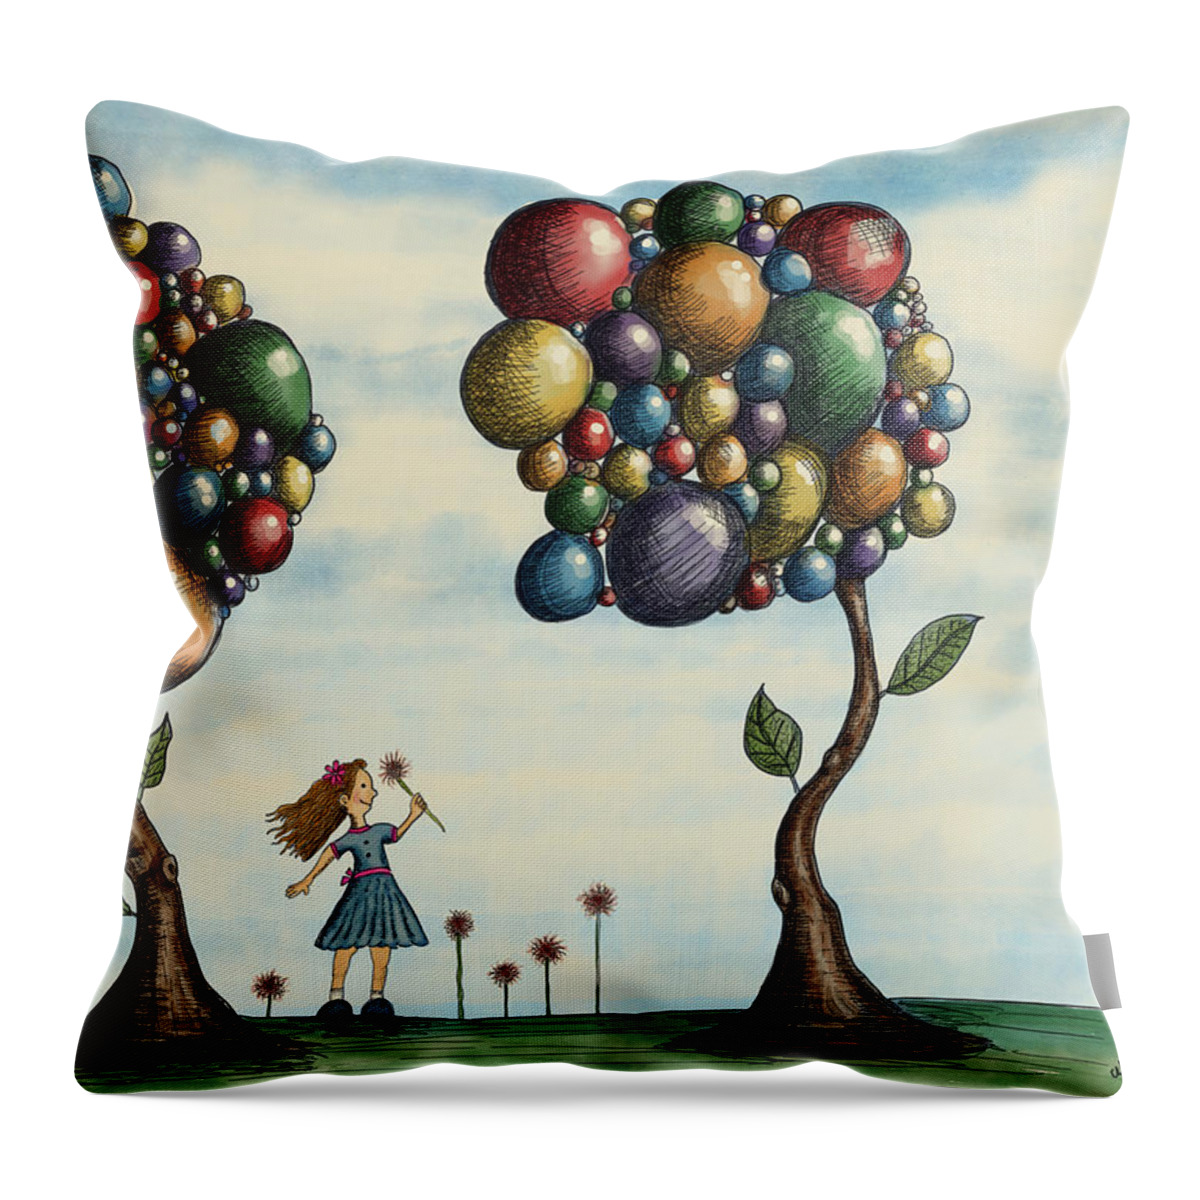 Illustration Throw Pillow featuring the drawing Basie and the Gumball Trees by Christina Wedberg